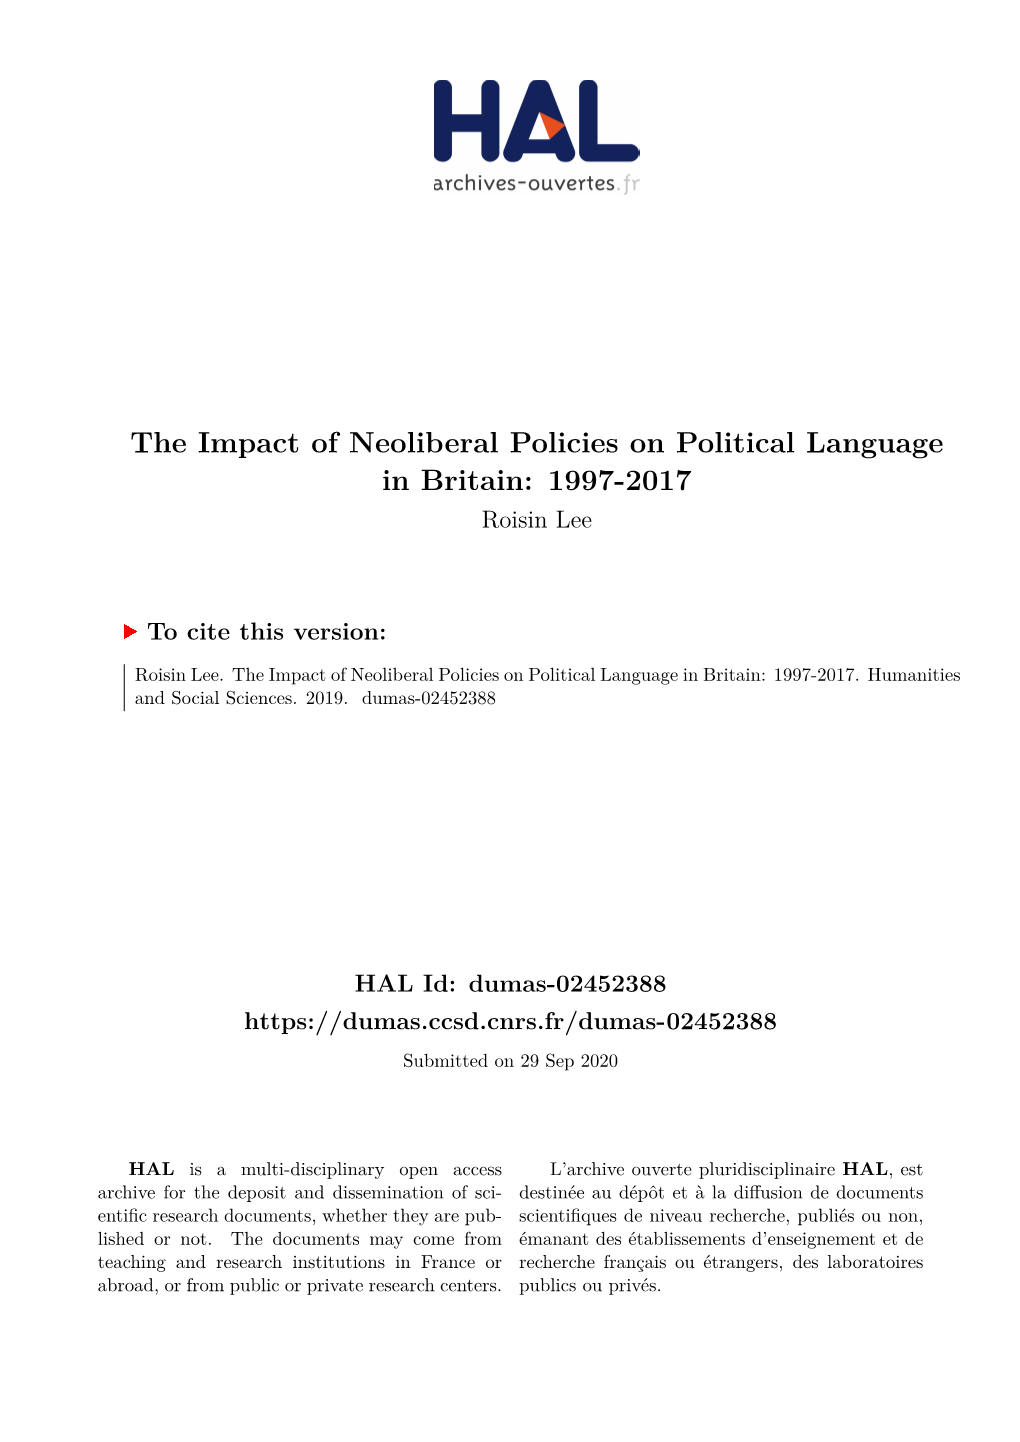 The Impact of Neoliberal Policies on Political Language in Britain: 1997-2017 Roisin Lee